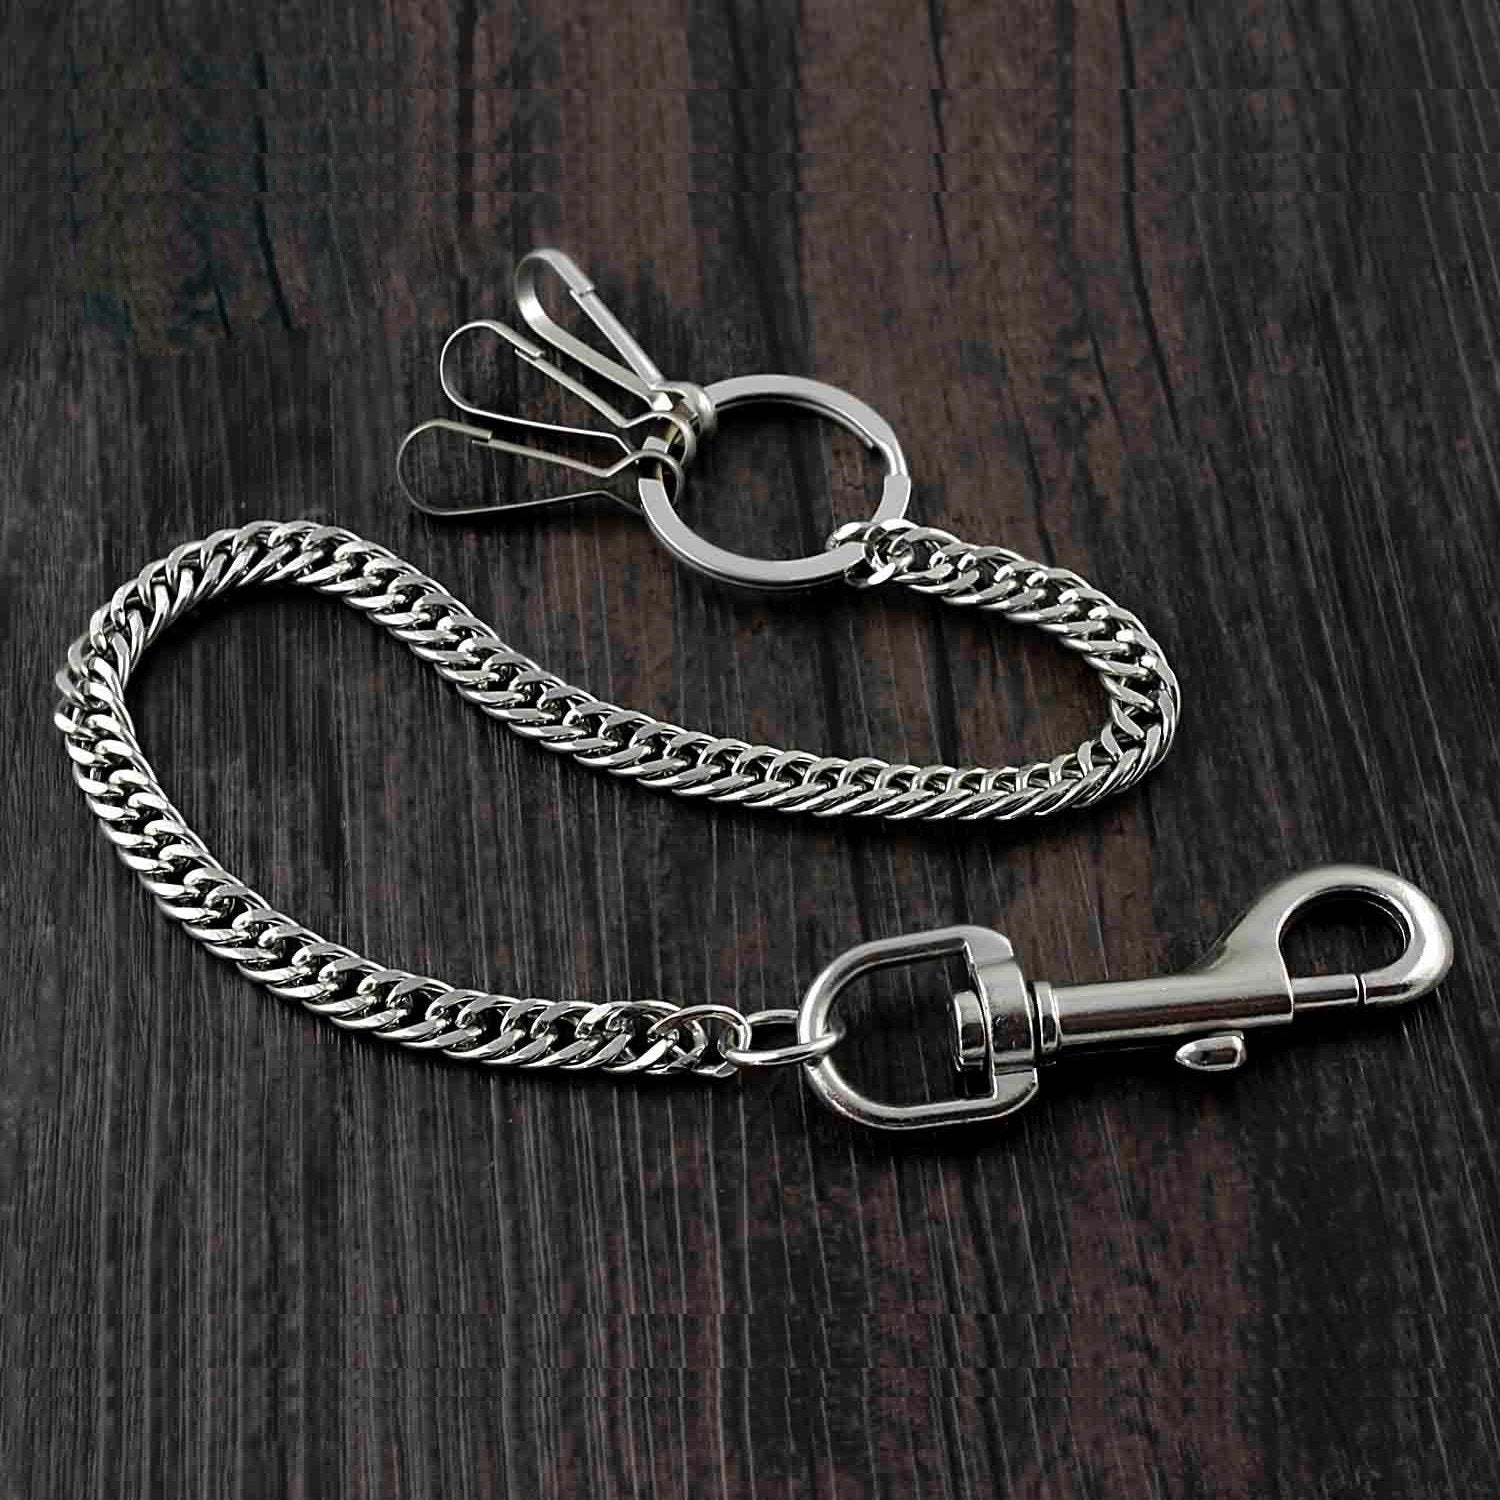 Solid Stainless Steel Wallet Chain Cool Punk Rock Biker Trucker Wallet Chain Trucker Wallet Chain for Men